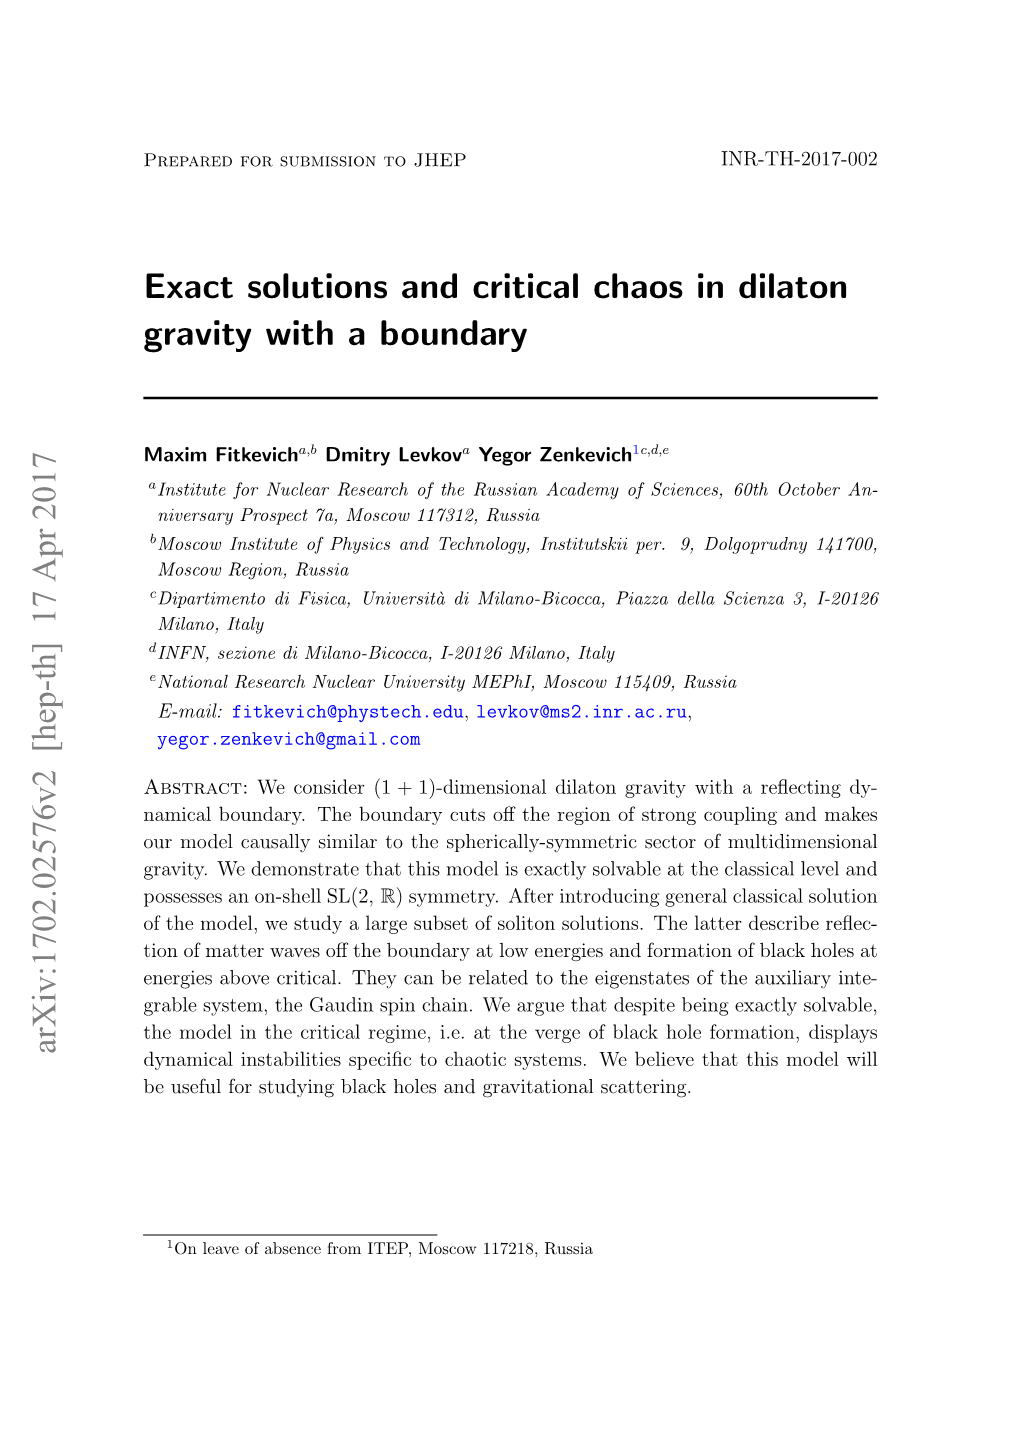 Exact Solutions and Critical Chaos in Dilaton Gravity with a Boundary